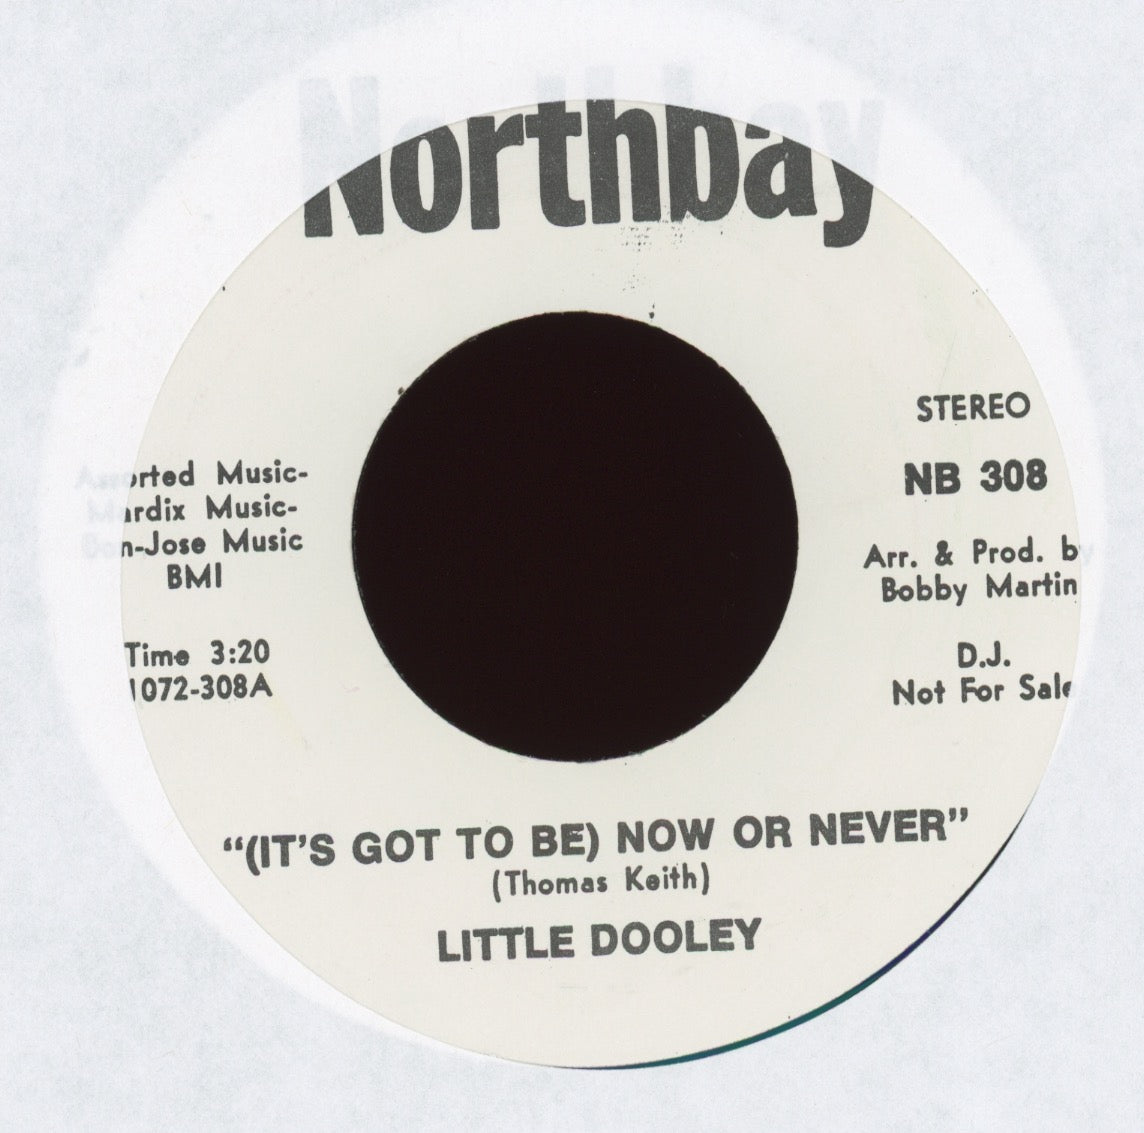 Little Dooley - (It's Got To Be) Now Or Never on Northbay Promo Crossover Northern Soul 45